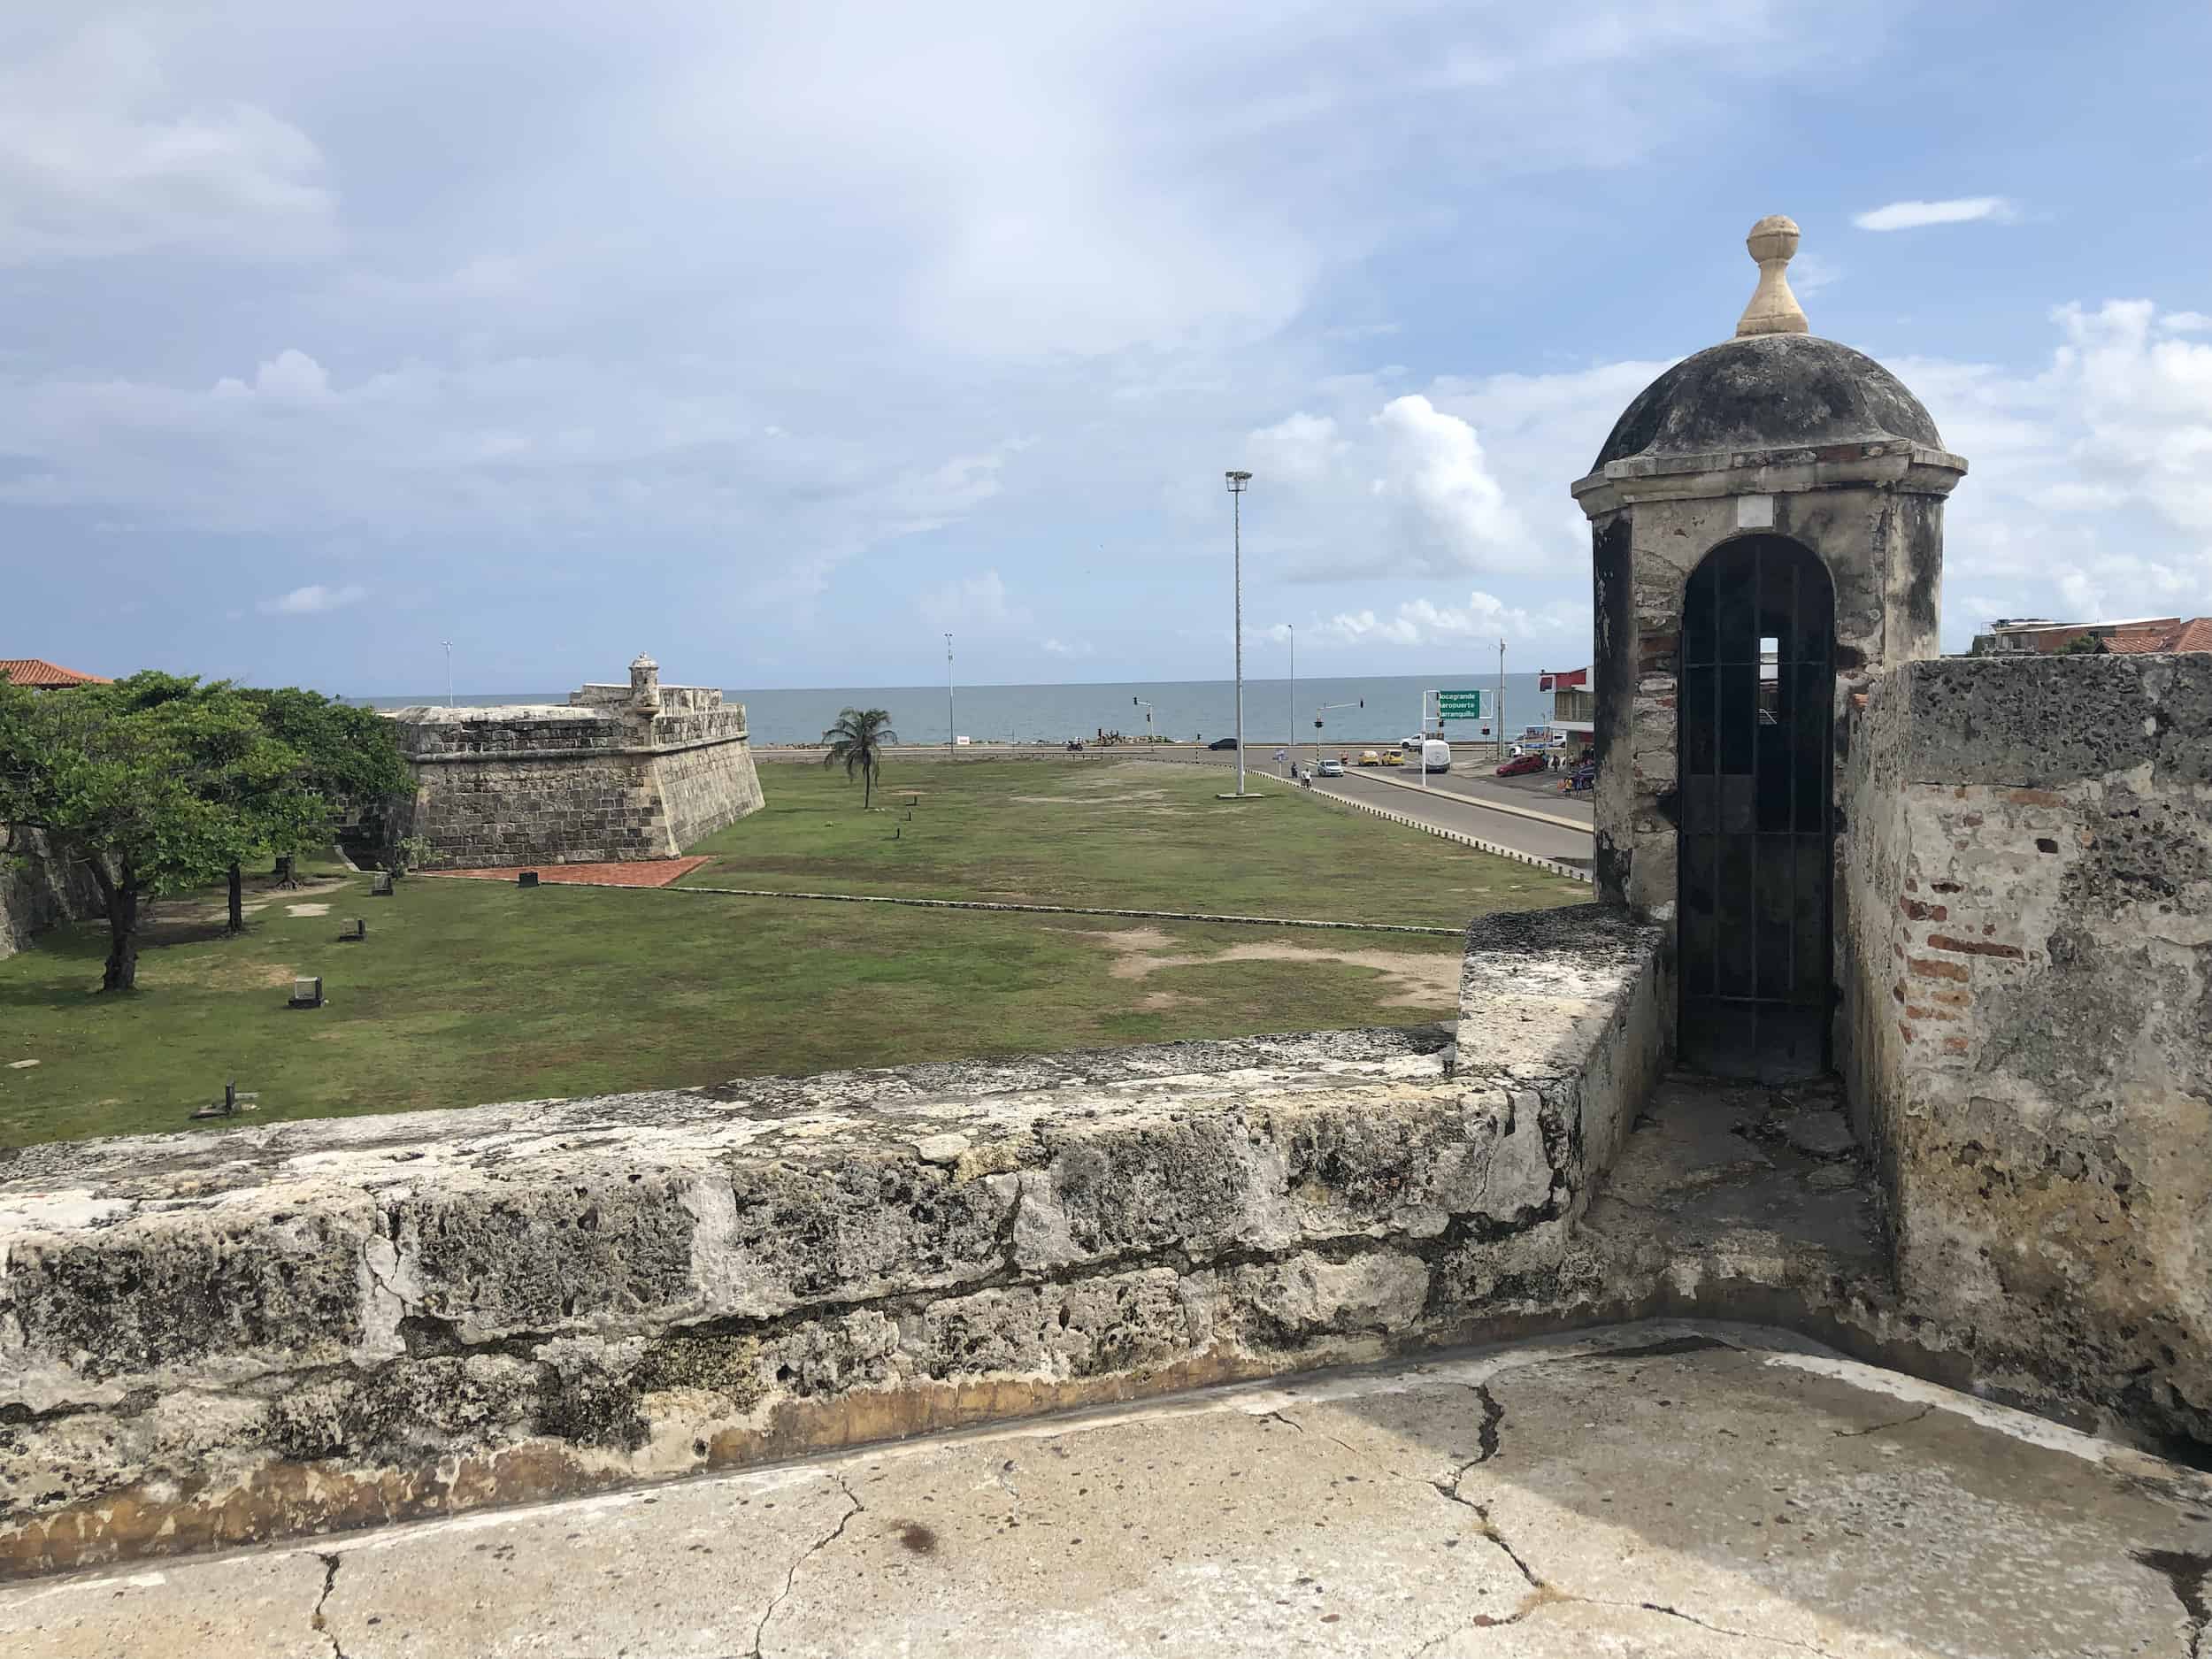 Sentry box on the Bastion of Saint Luke on the Walls of Cartagena, Colombia